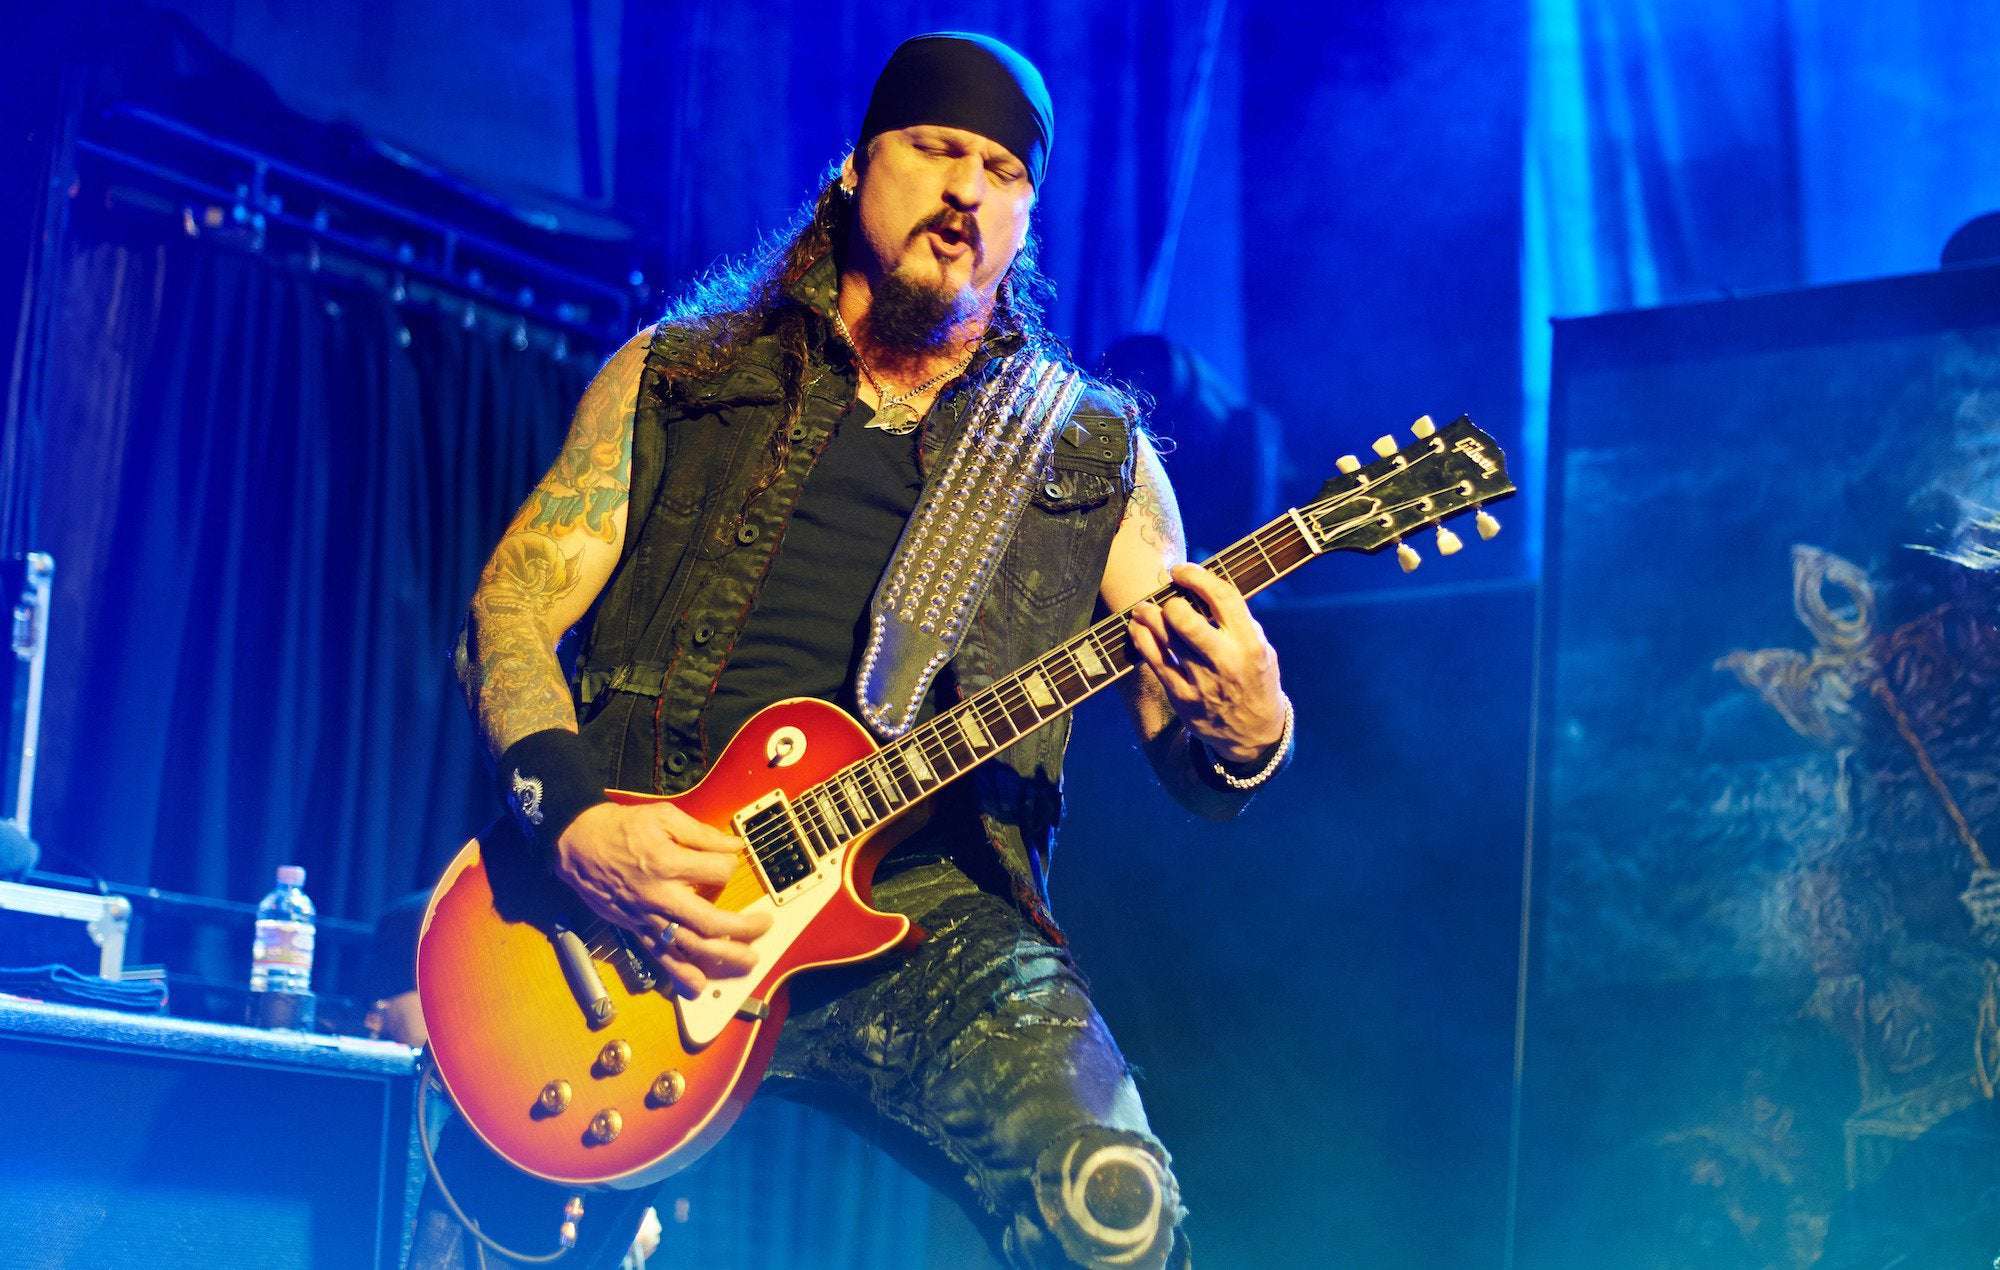 image for Iced Earth guitarist Jon Schaffer wanted by police for storming US Capitol